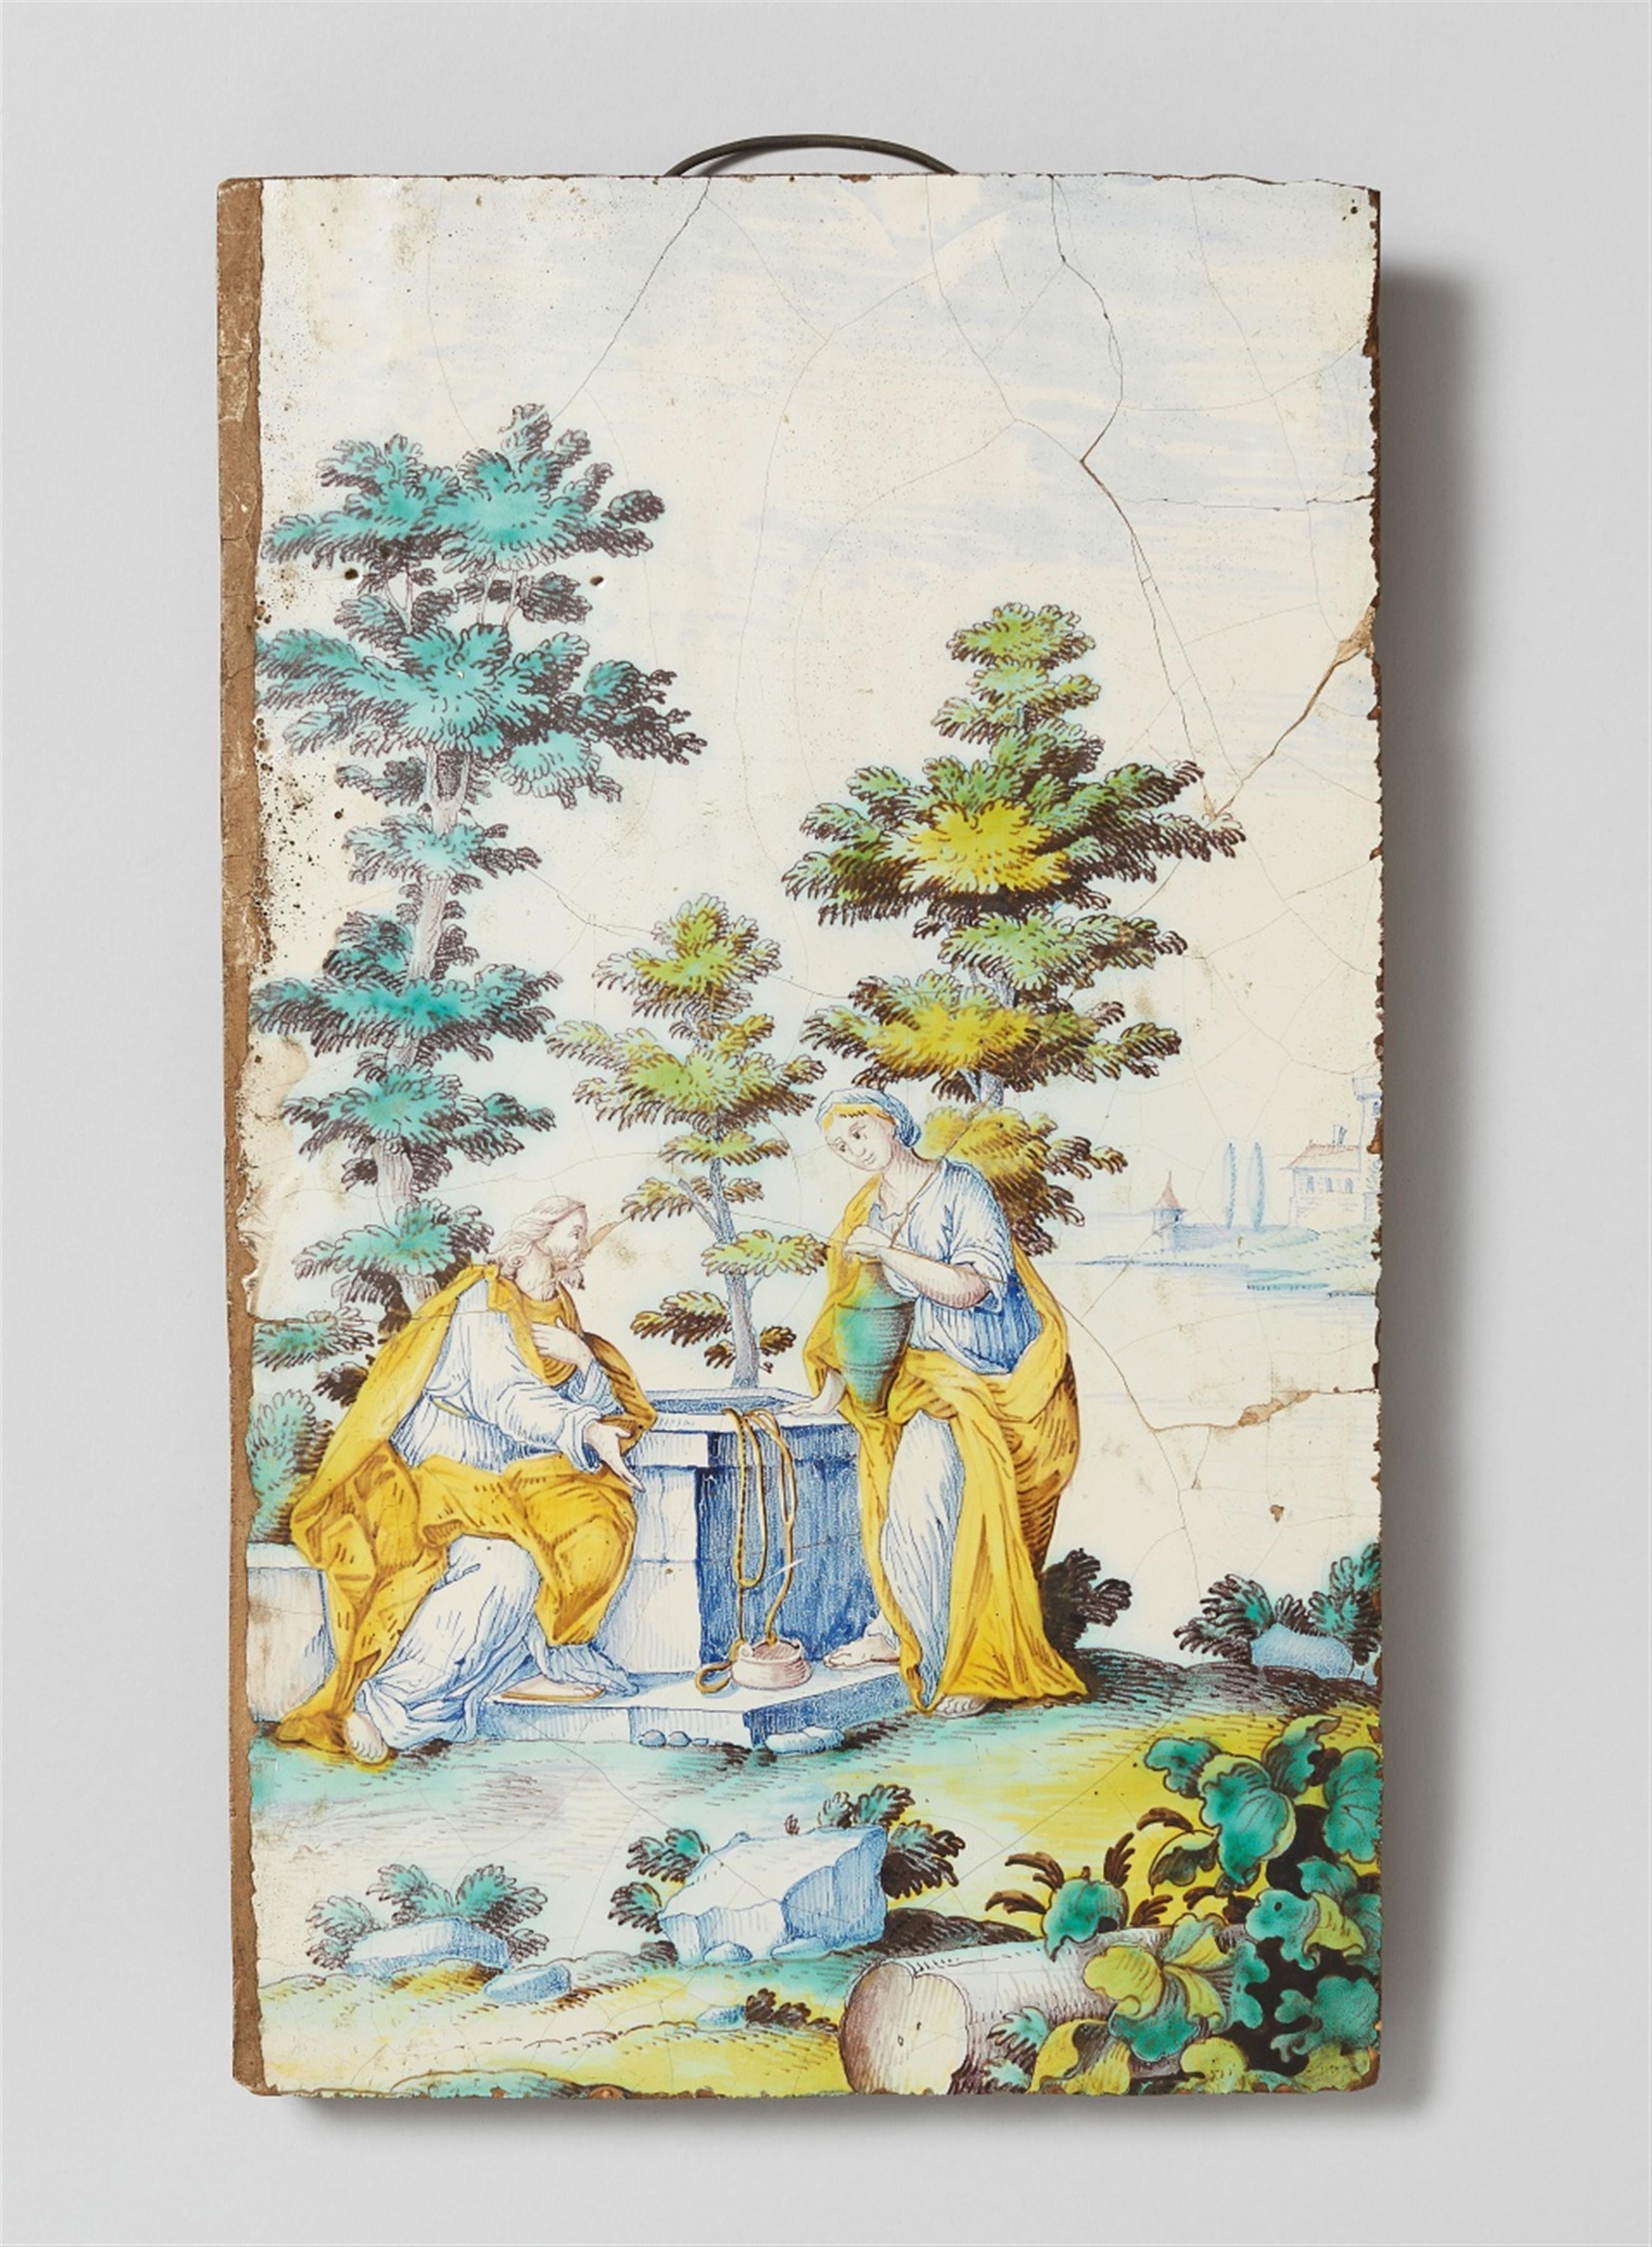 A Swiss faience oven tile depicting Jesus and the Samaritan woman - image-1